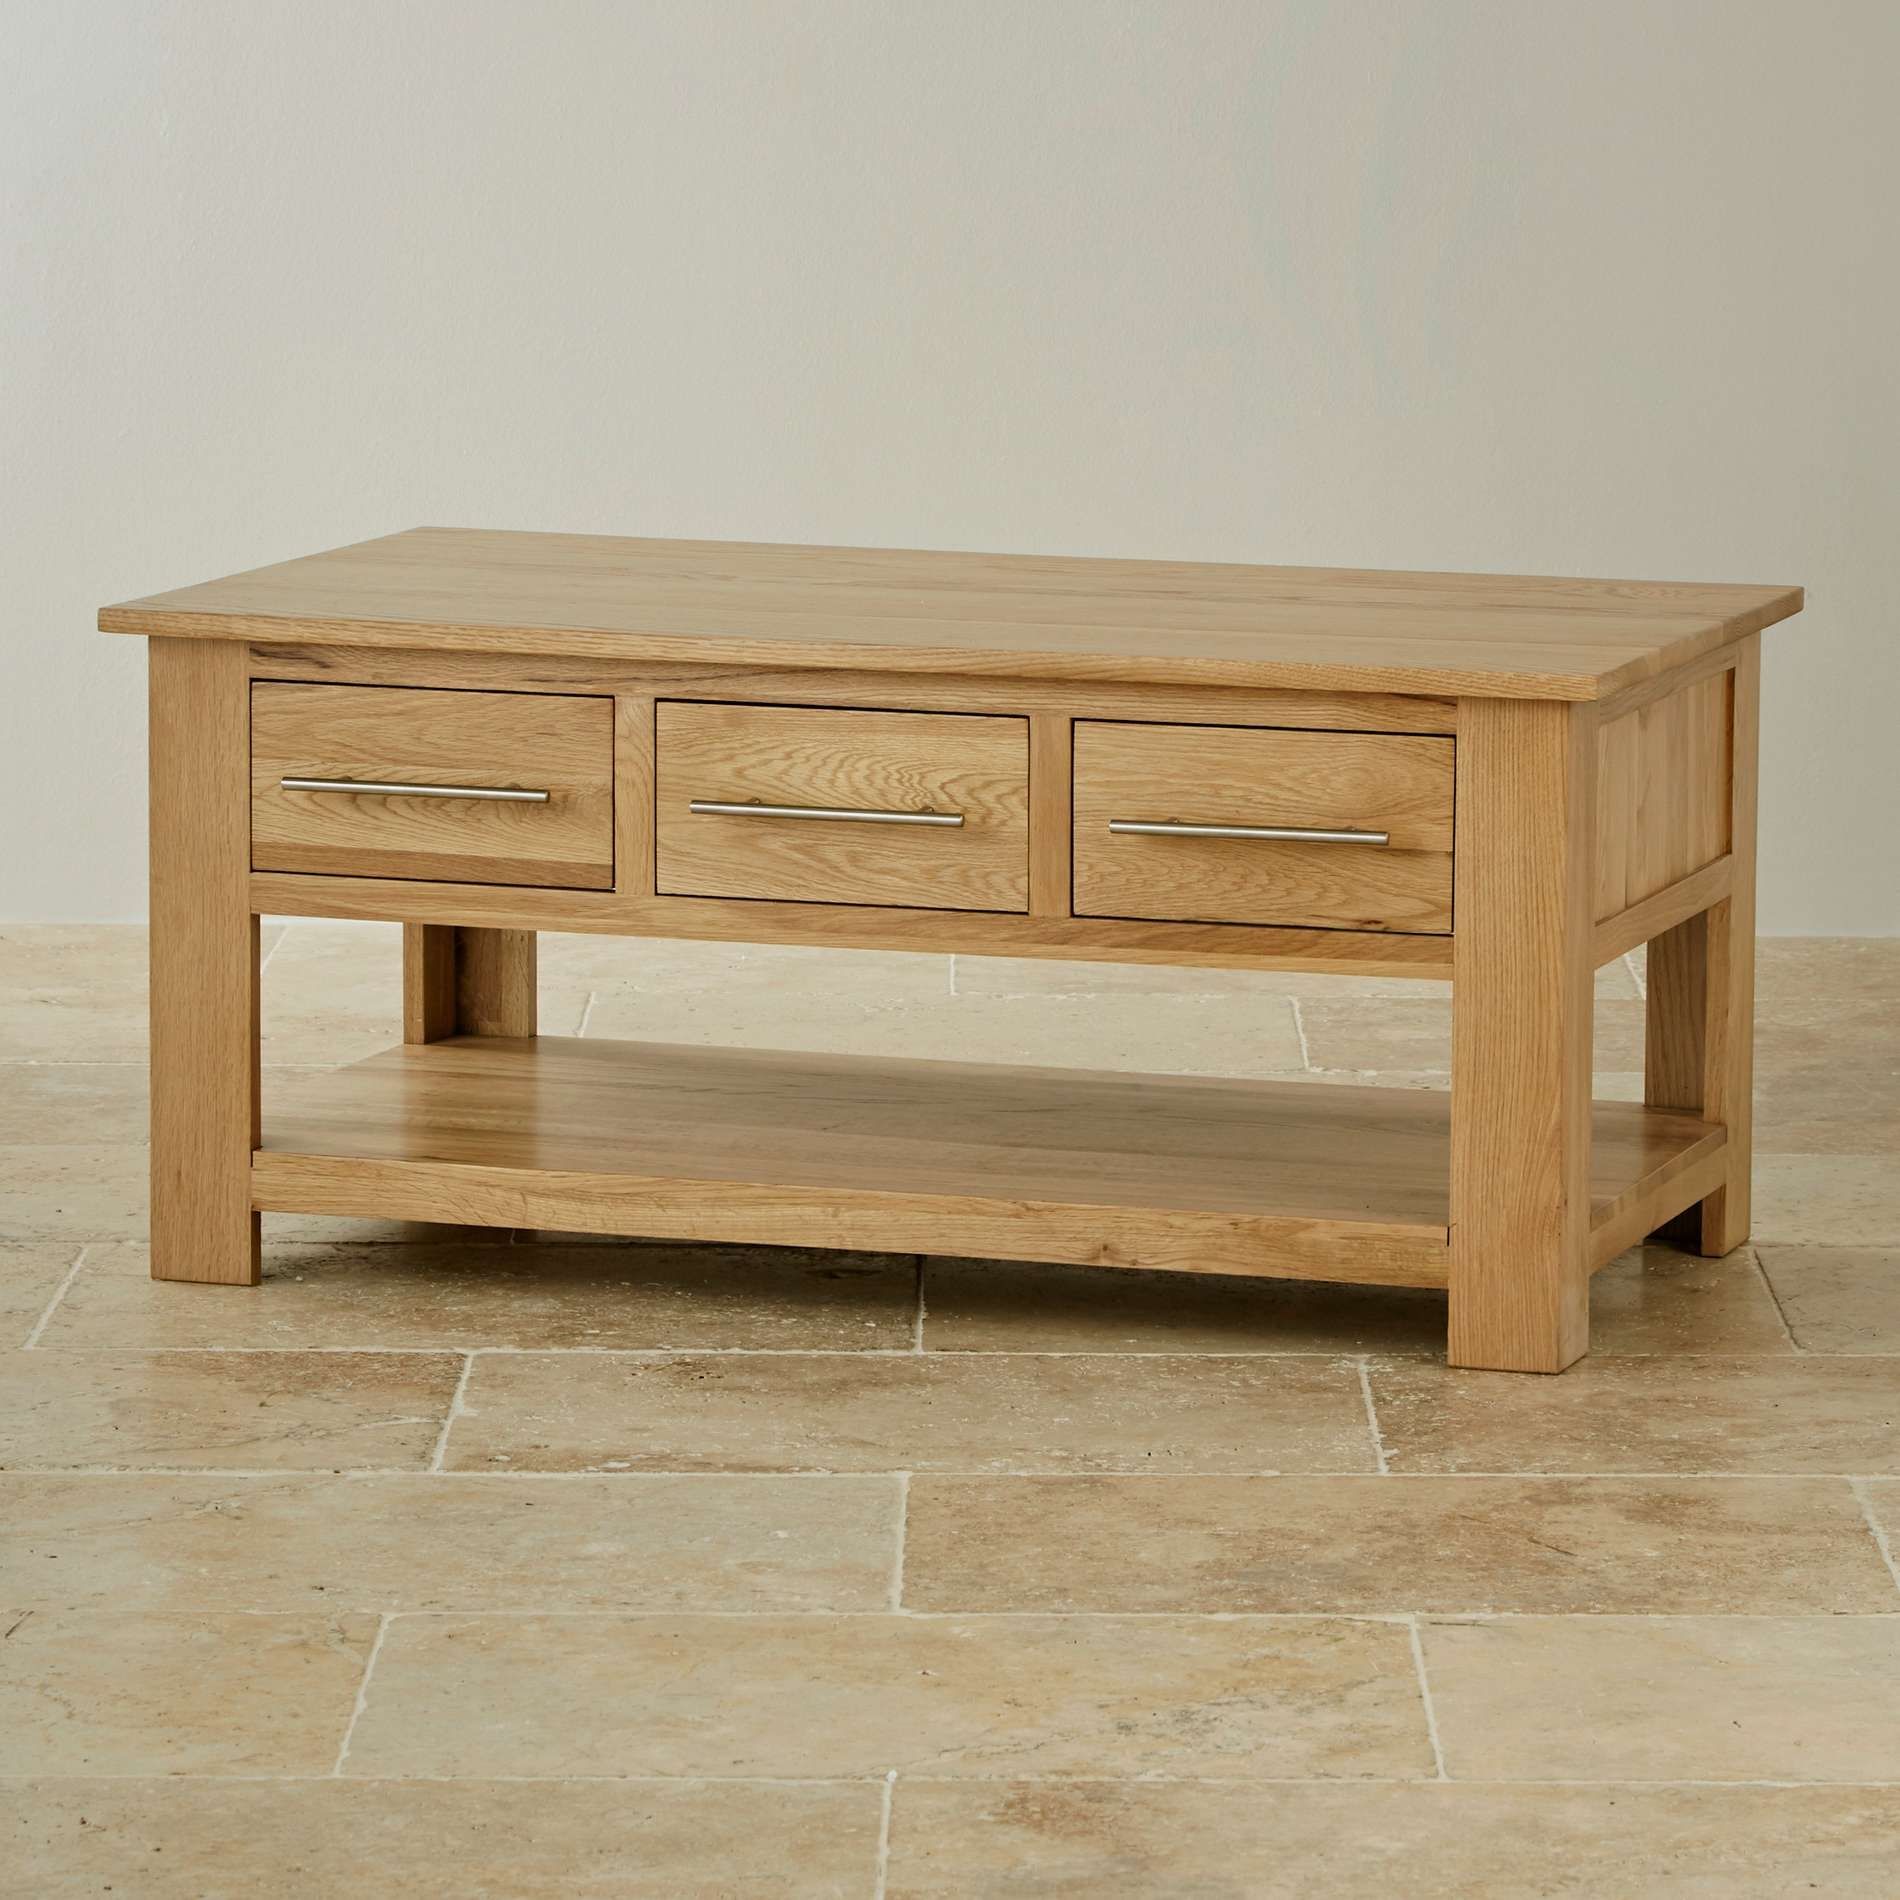 Coffee Table : Amazing Granite Coffee Table Black Square Coffee In Trendy Oak Coffee Table With Drawers (View 1 of 20)